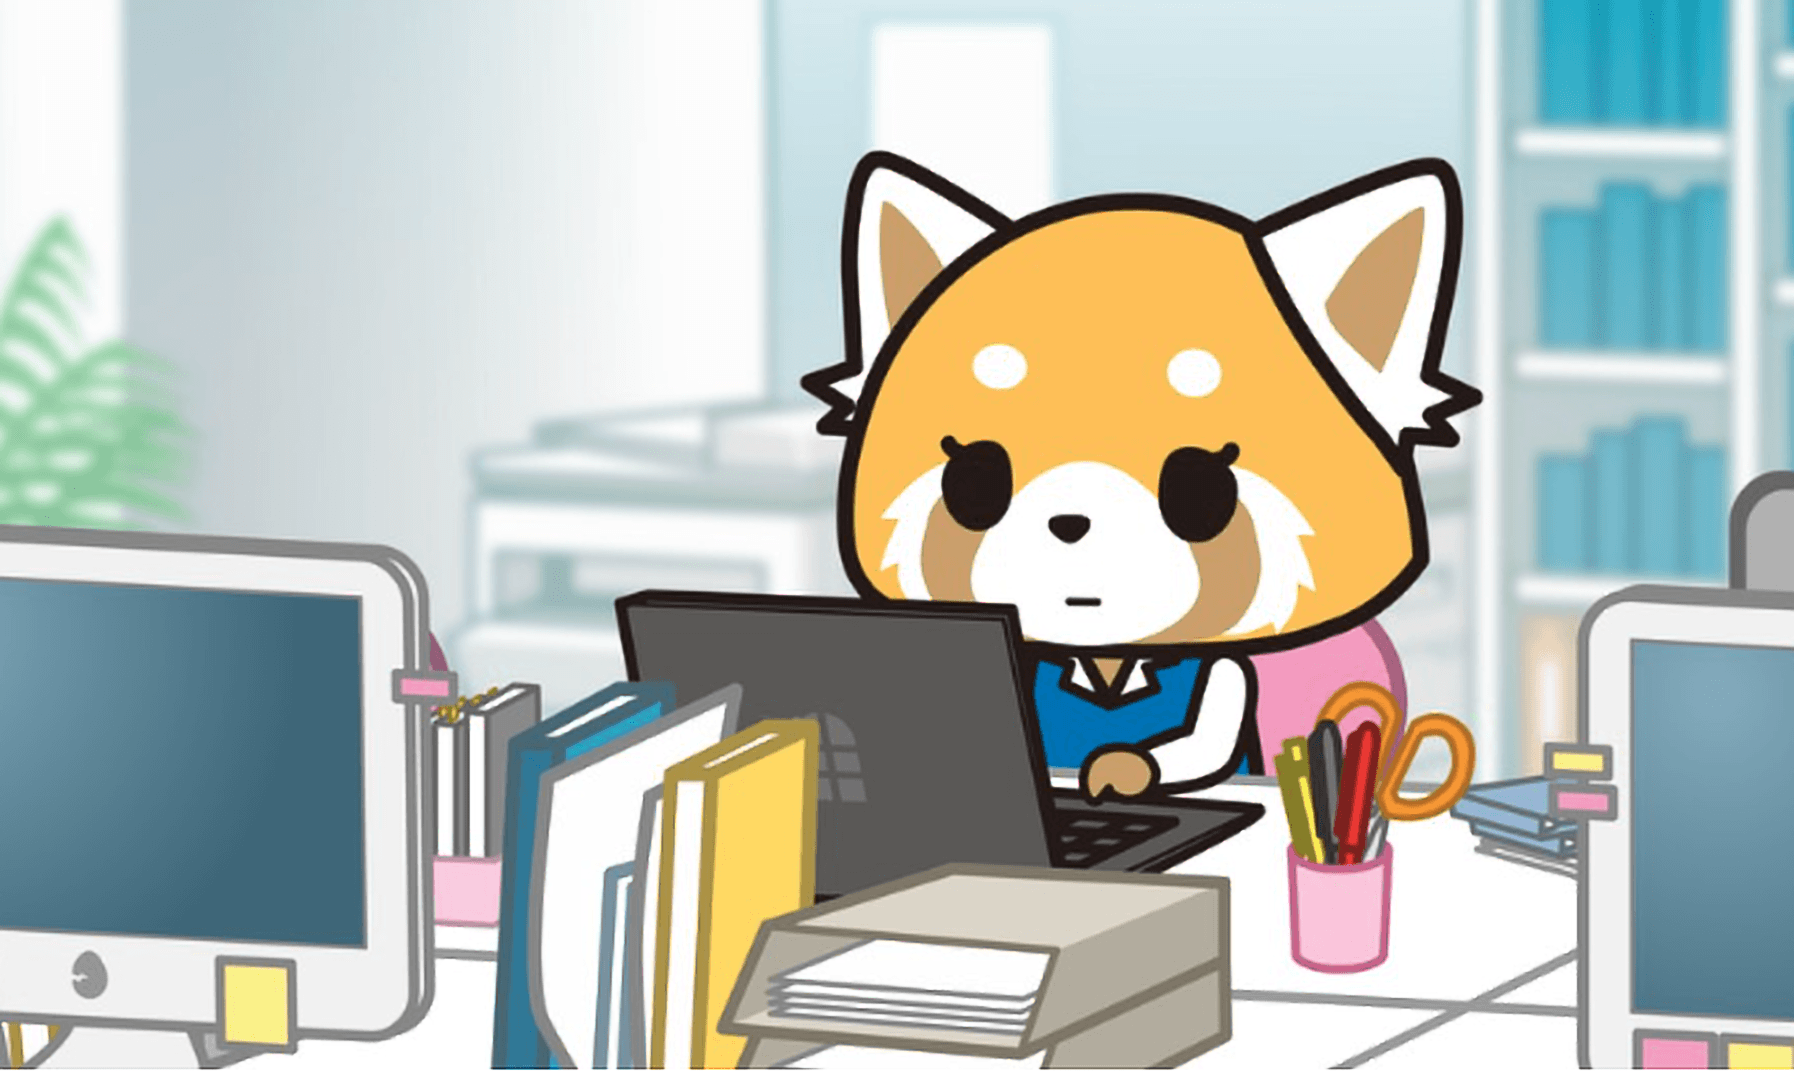 Aggretsuko: A Woman's Life in the Workplace